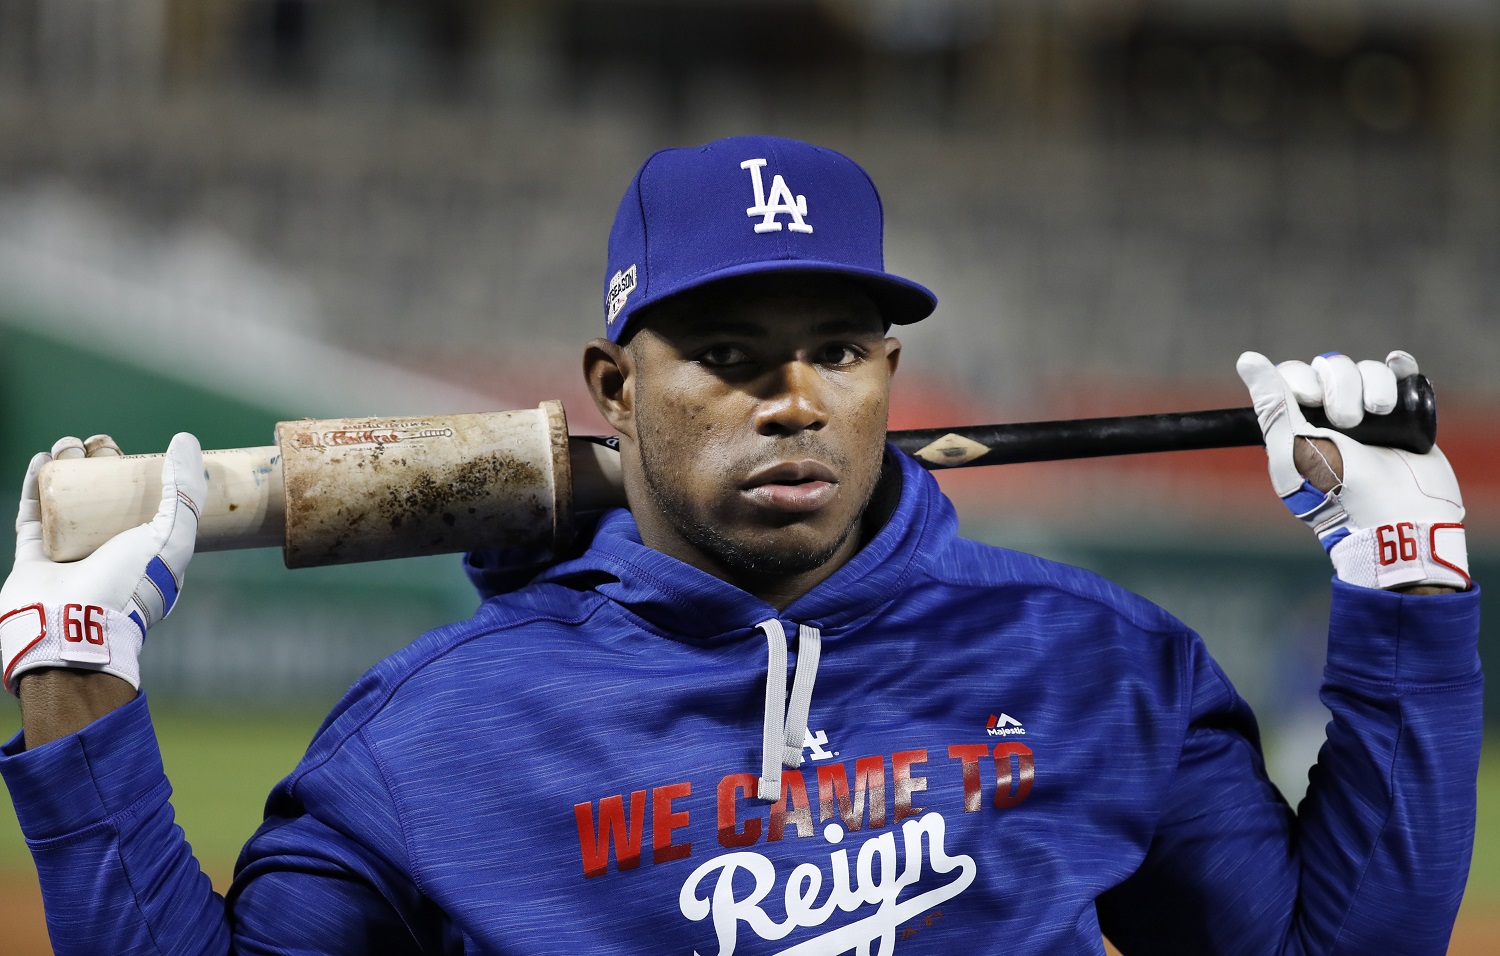 Los Angeles Dodgers right fielder Yasiel Puig warms up during baseball batting practice at Nationals Park, Wednesday, Oct. 5, 2016, in Washington. The Nationals host the Los Angeles Dodgers in Game 1 of the National League Division Series baseball game on Friday. (AP Photo/Alex Brandon)